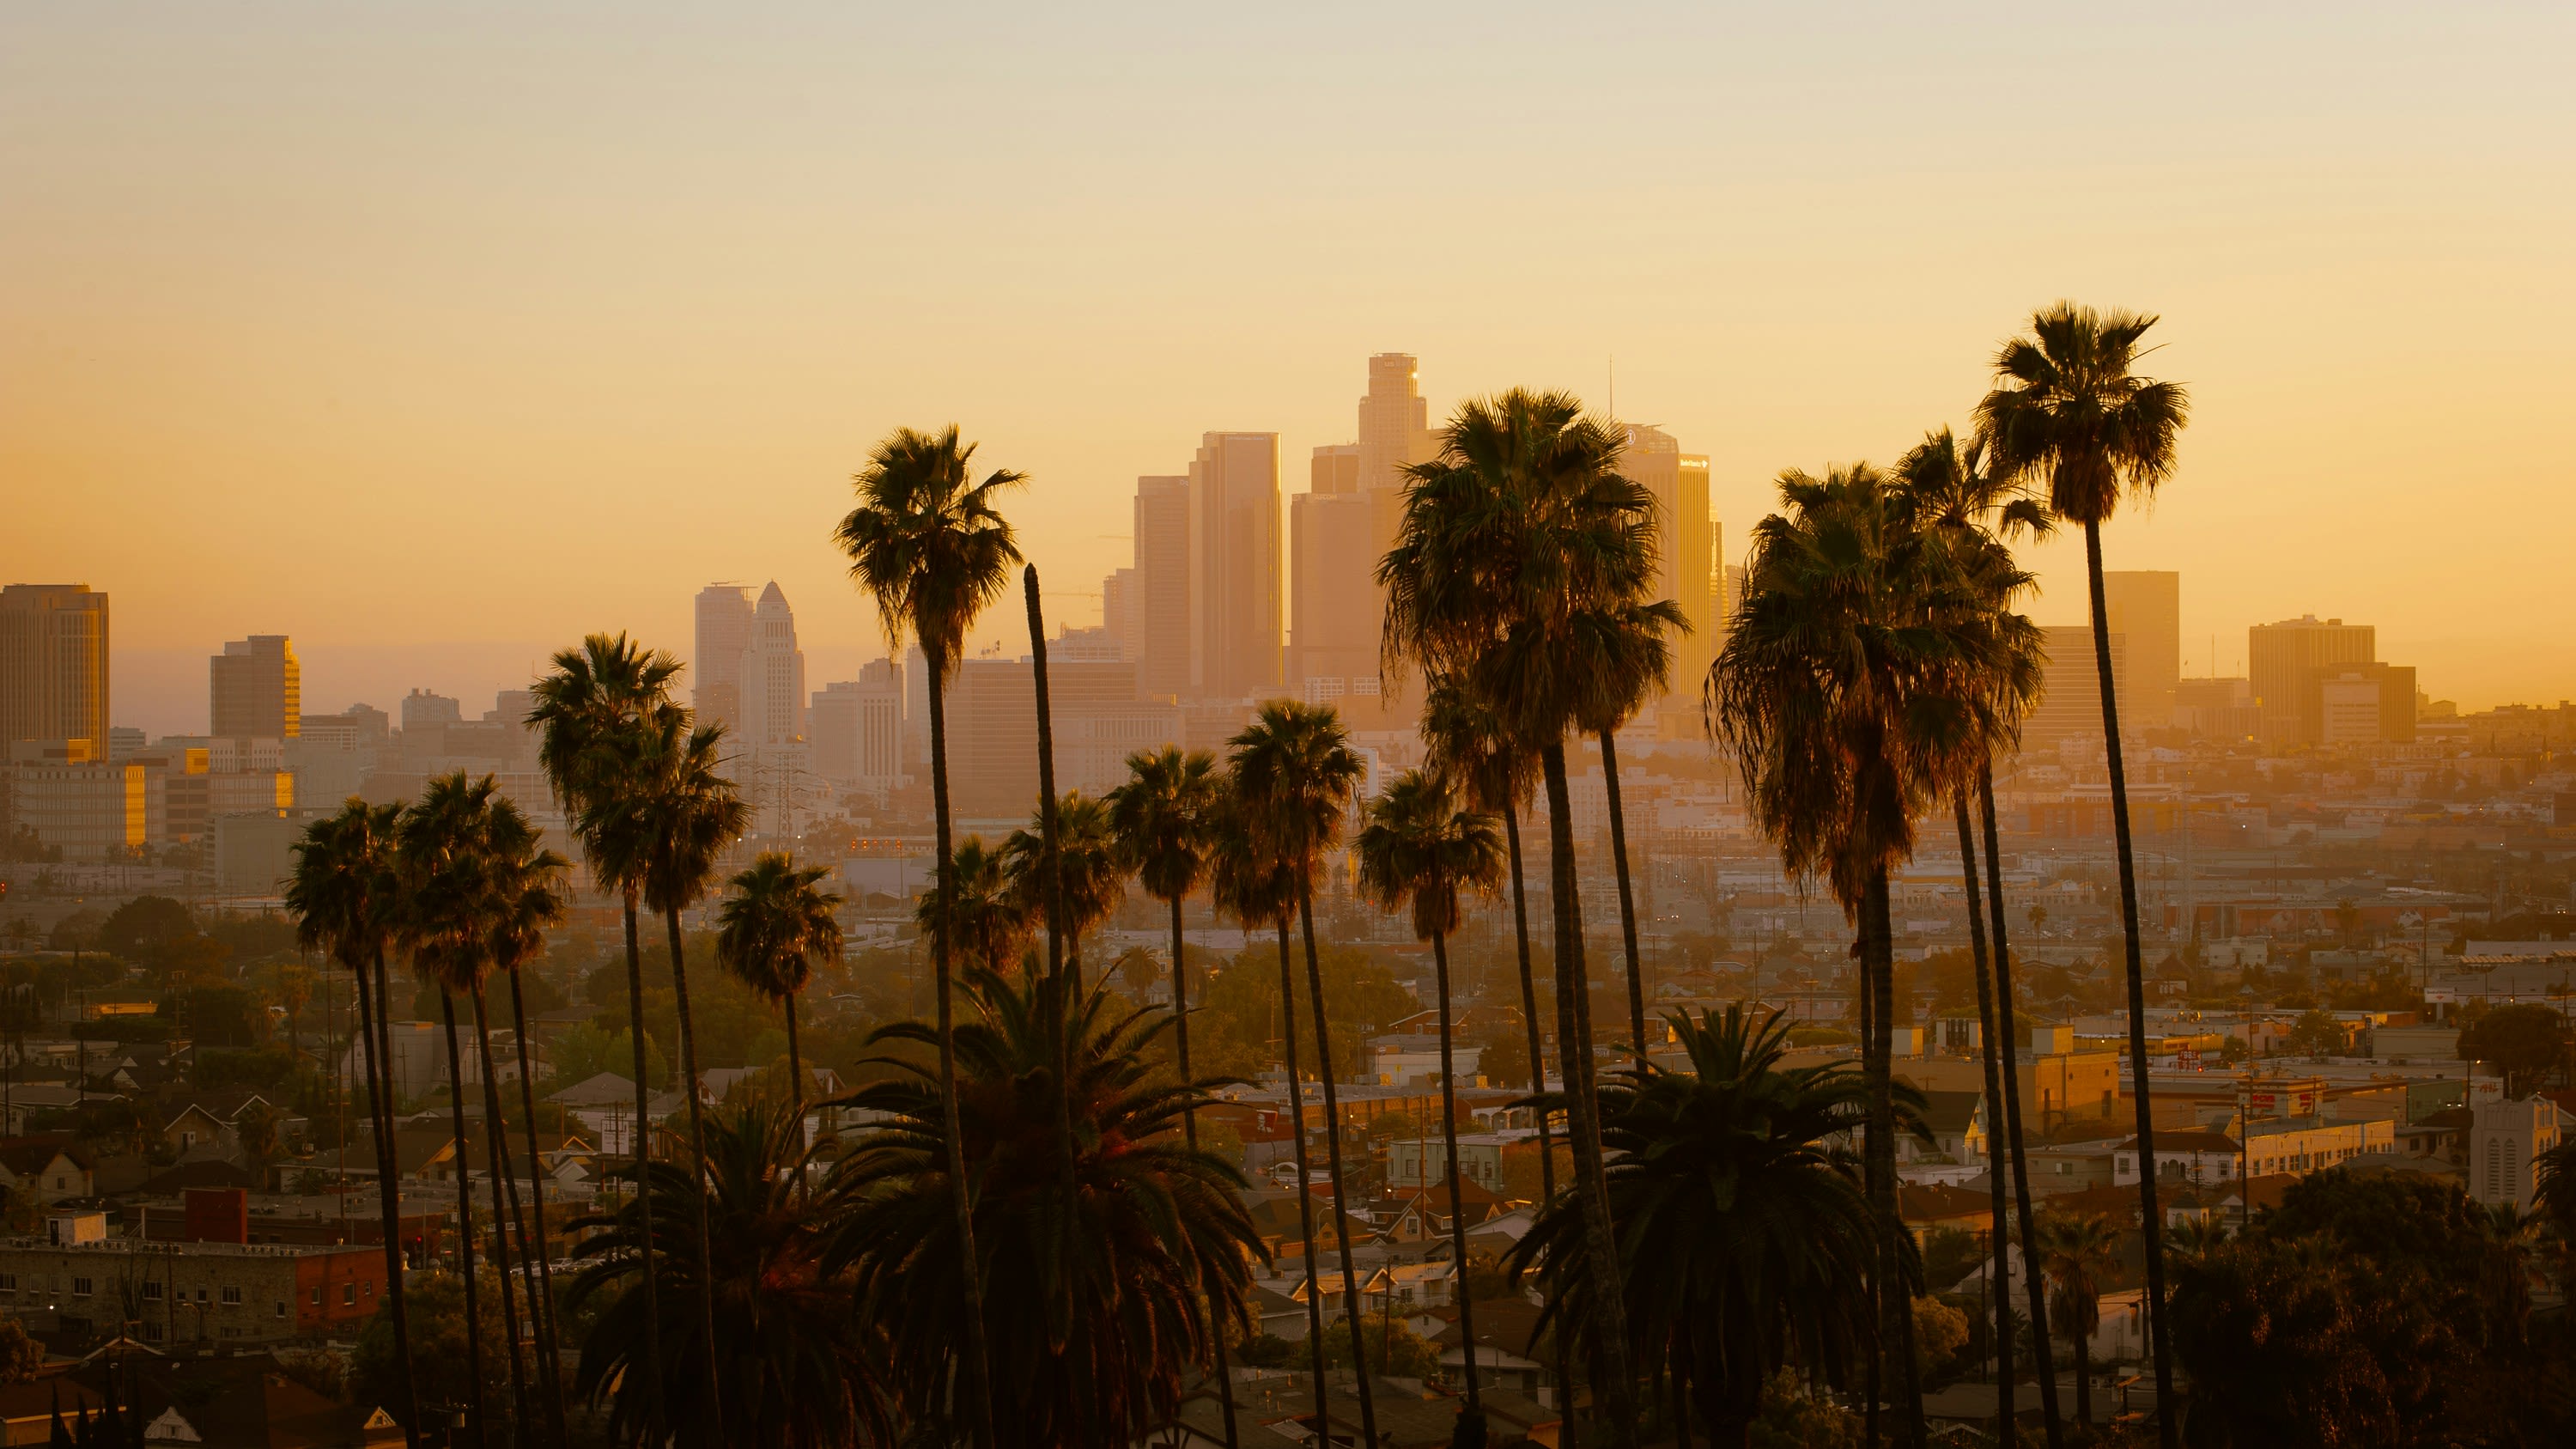 Sunset view over a city skyline with tall buildings and palm trees in the foreground. warm golden light bathes the scene.